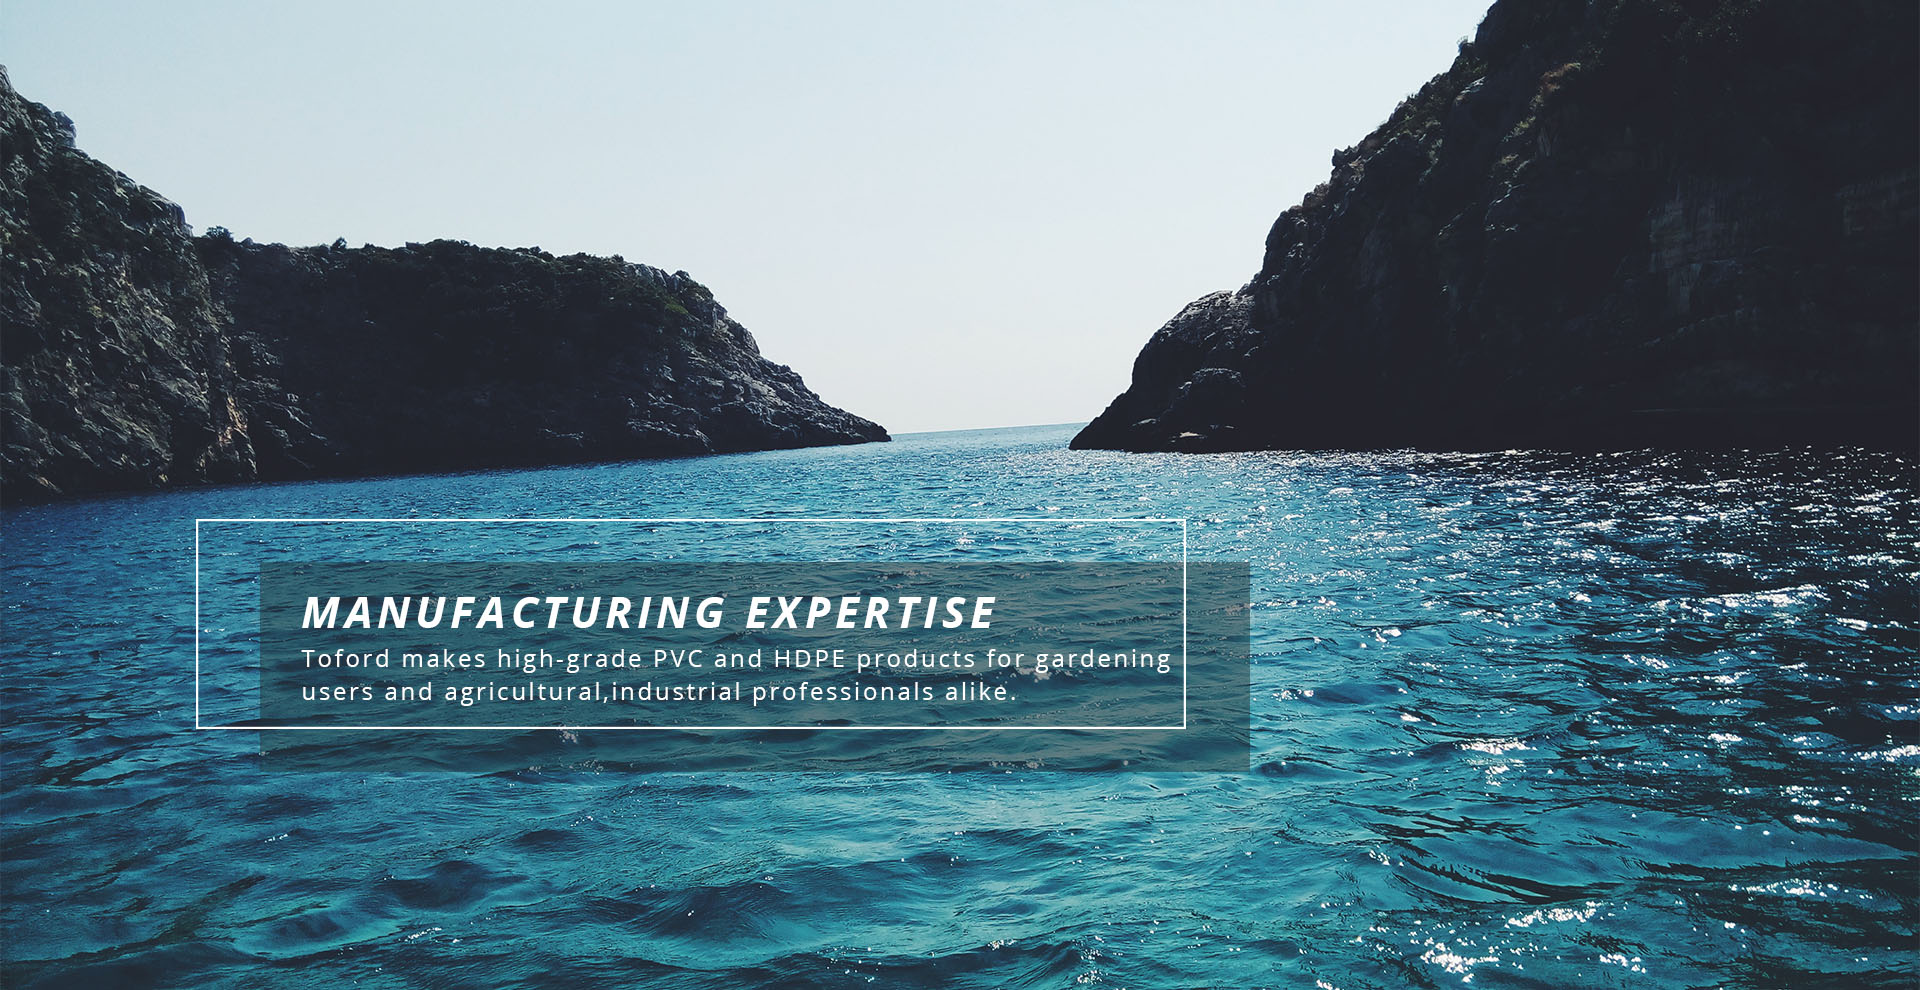 Manufacturing expertise